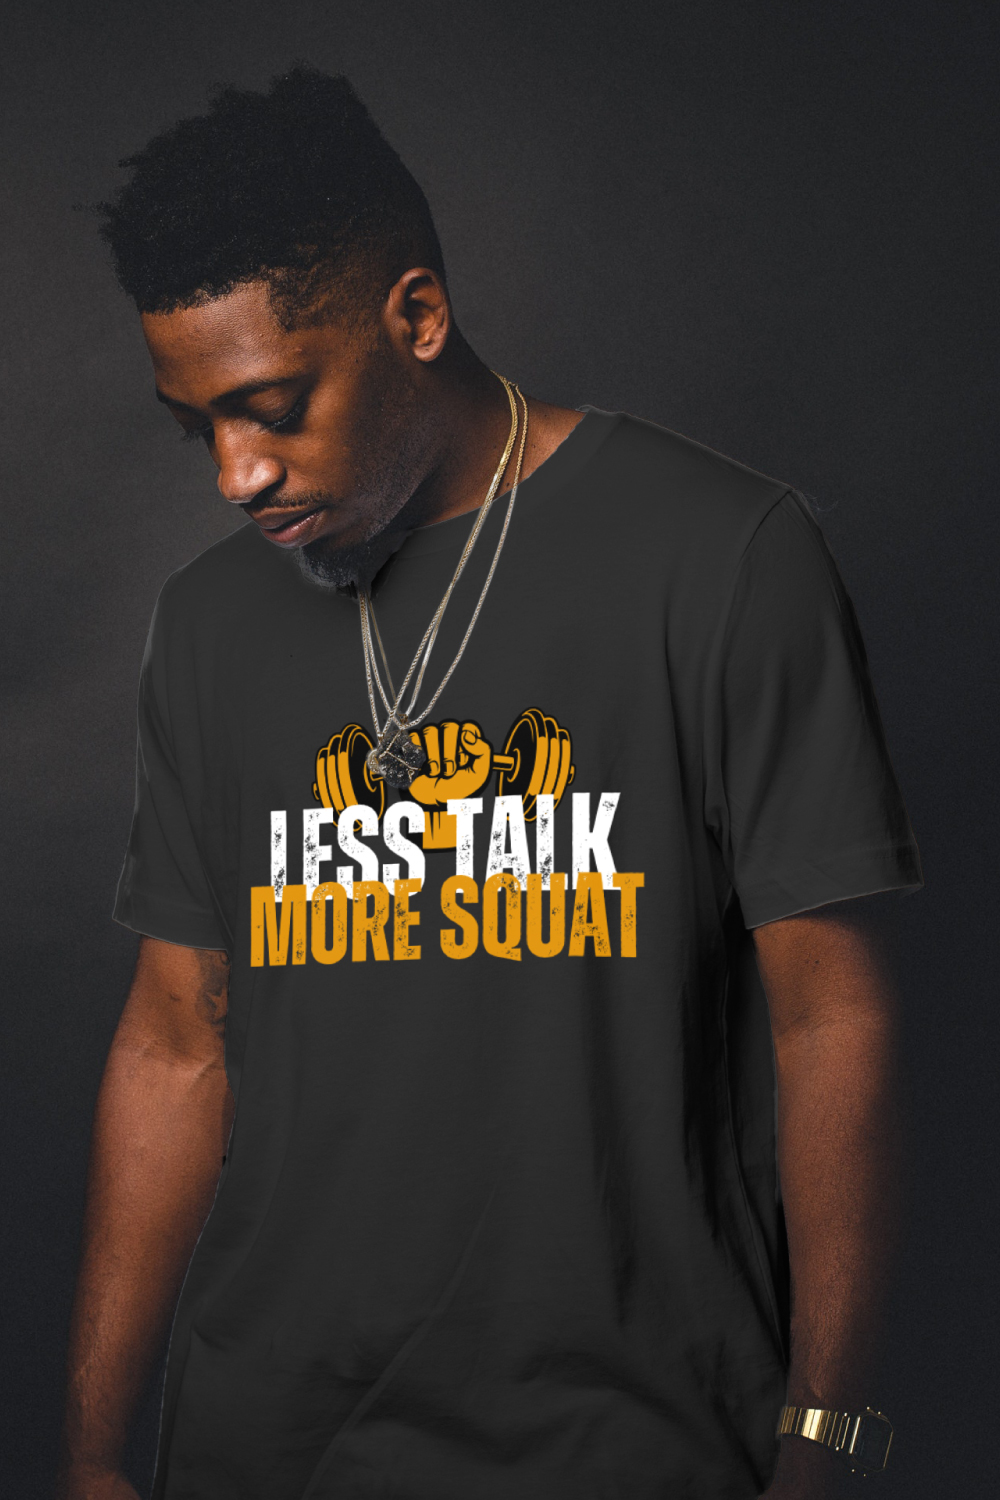 Less talk more squant tshirtdesign pinterest preview image.